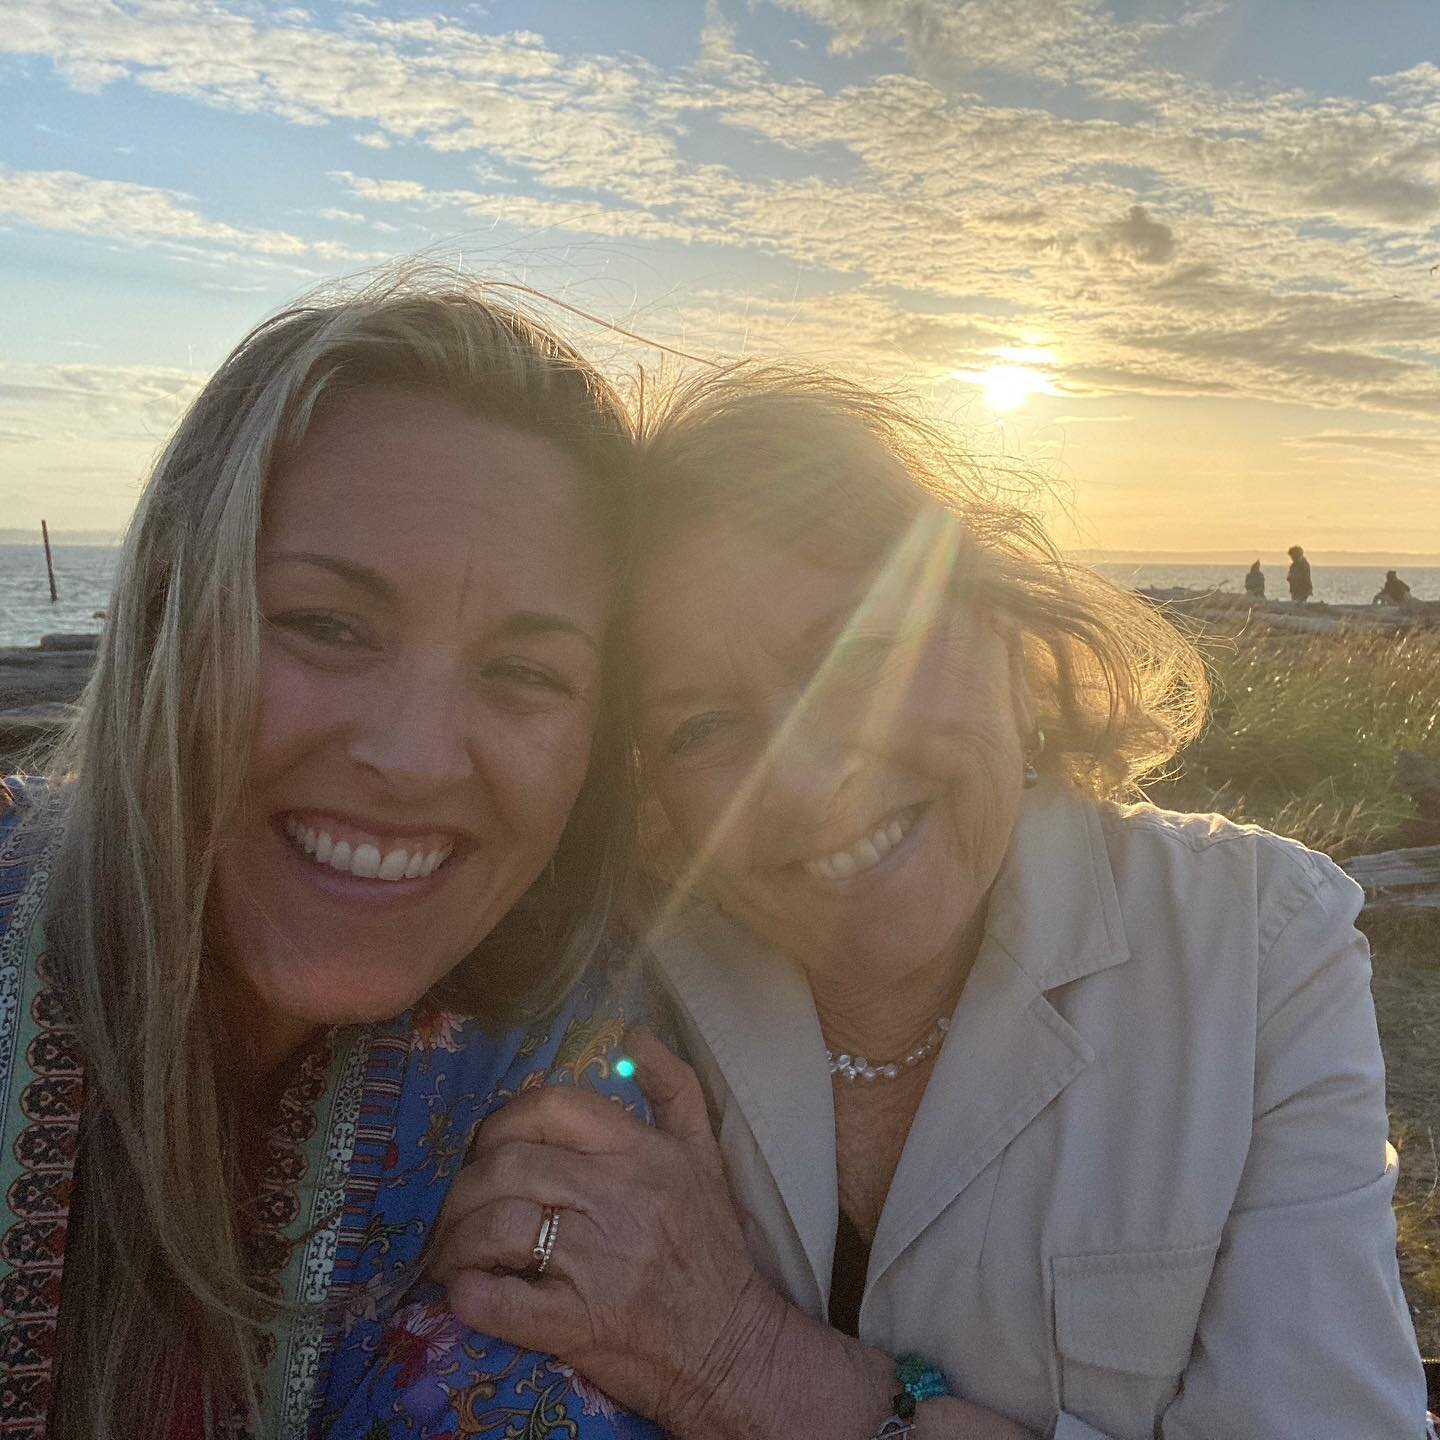 Cheers to the strong amazing women in our lives &mdash; today &amp; everyday! 🥂 May we KNOW them, may we BE them, and may we RAISE them! ☀️💃🏼🙌🏼 I&rsquo;m so blessed to have the strongest woman I know as my Mom, Best Friend, Business Partner, fel